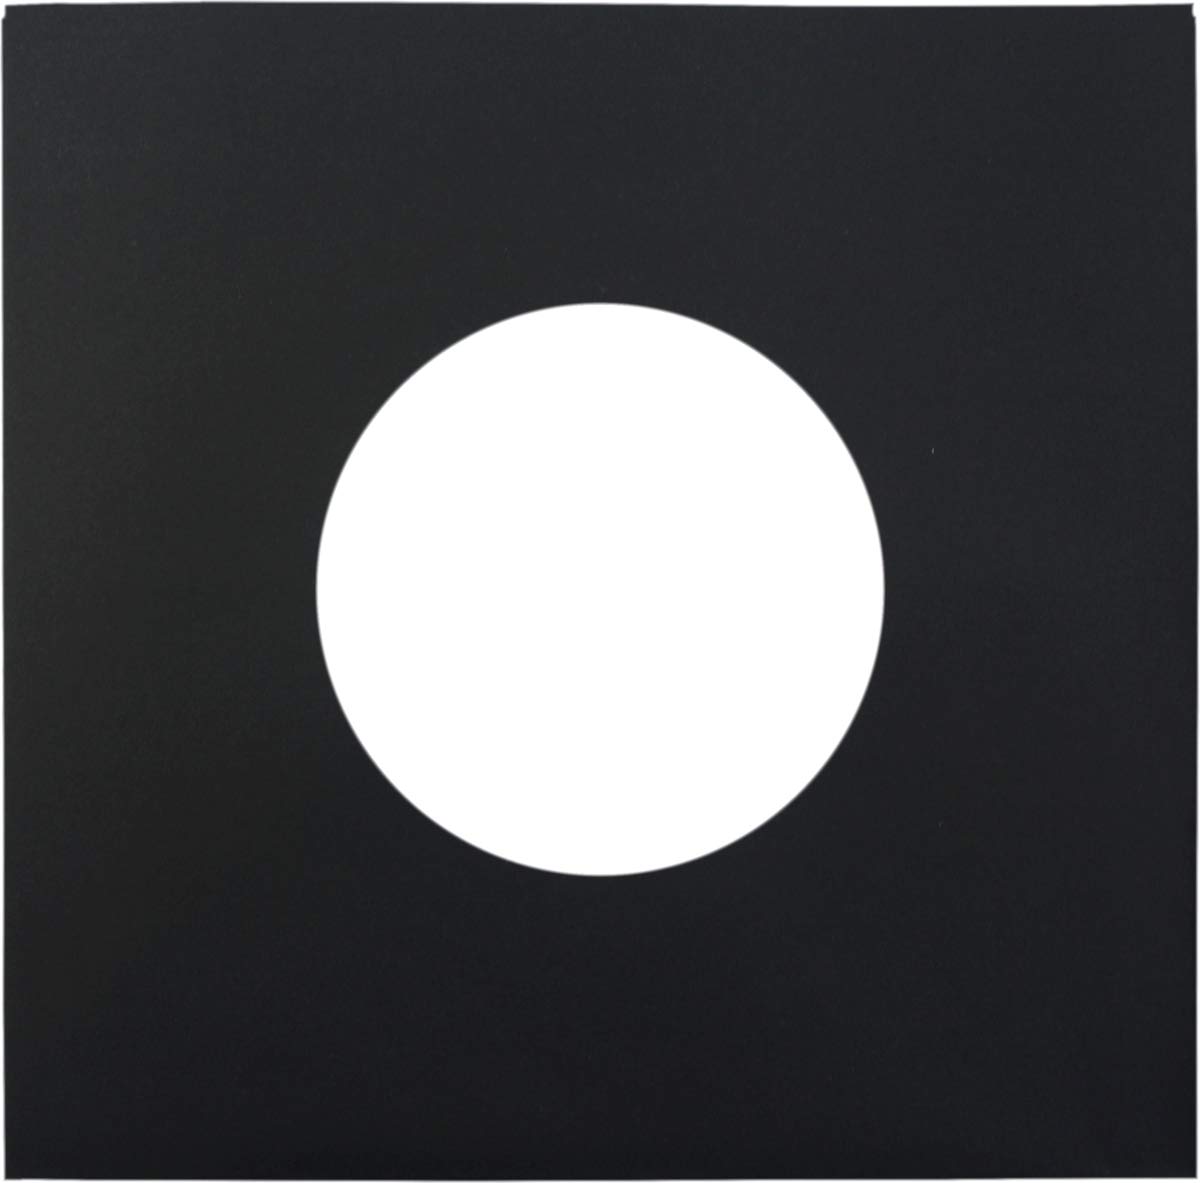 Square Deal Recordings & Supplies - 7" 45pm Vinyl Record Inner Sleeves - Archival Quality, Super Heavyweight 29# Black Paper with Hole - Set of 25#07IWBK